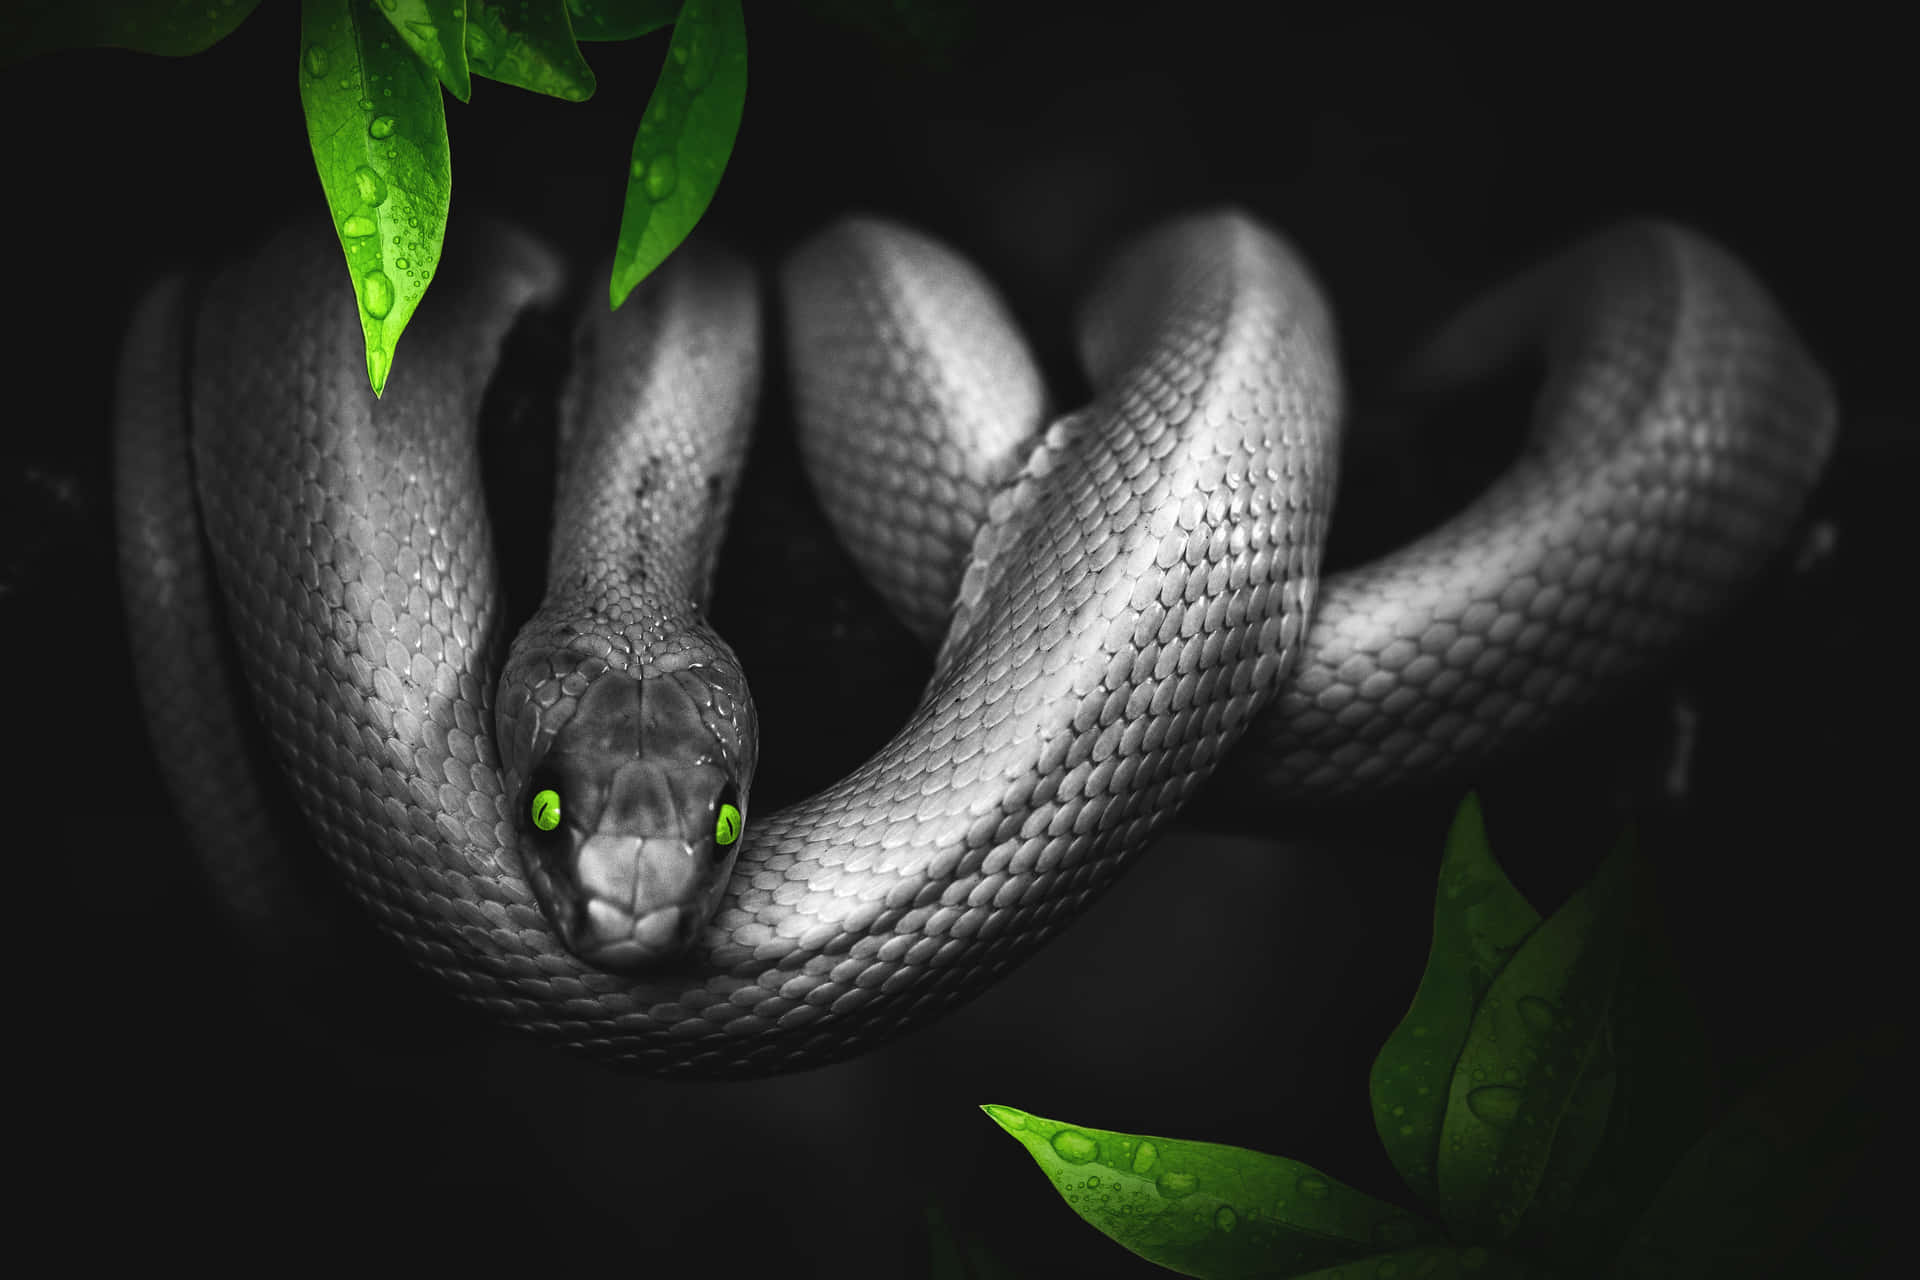 A Snake With Green Eyes Is Sitting On A Branch